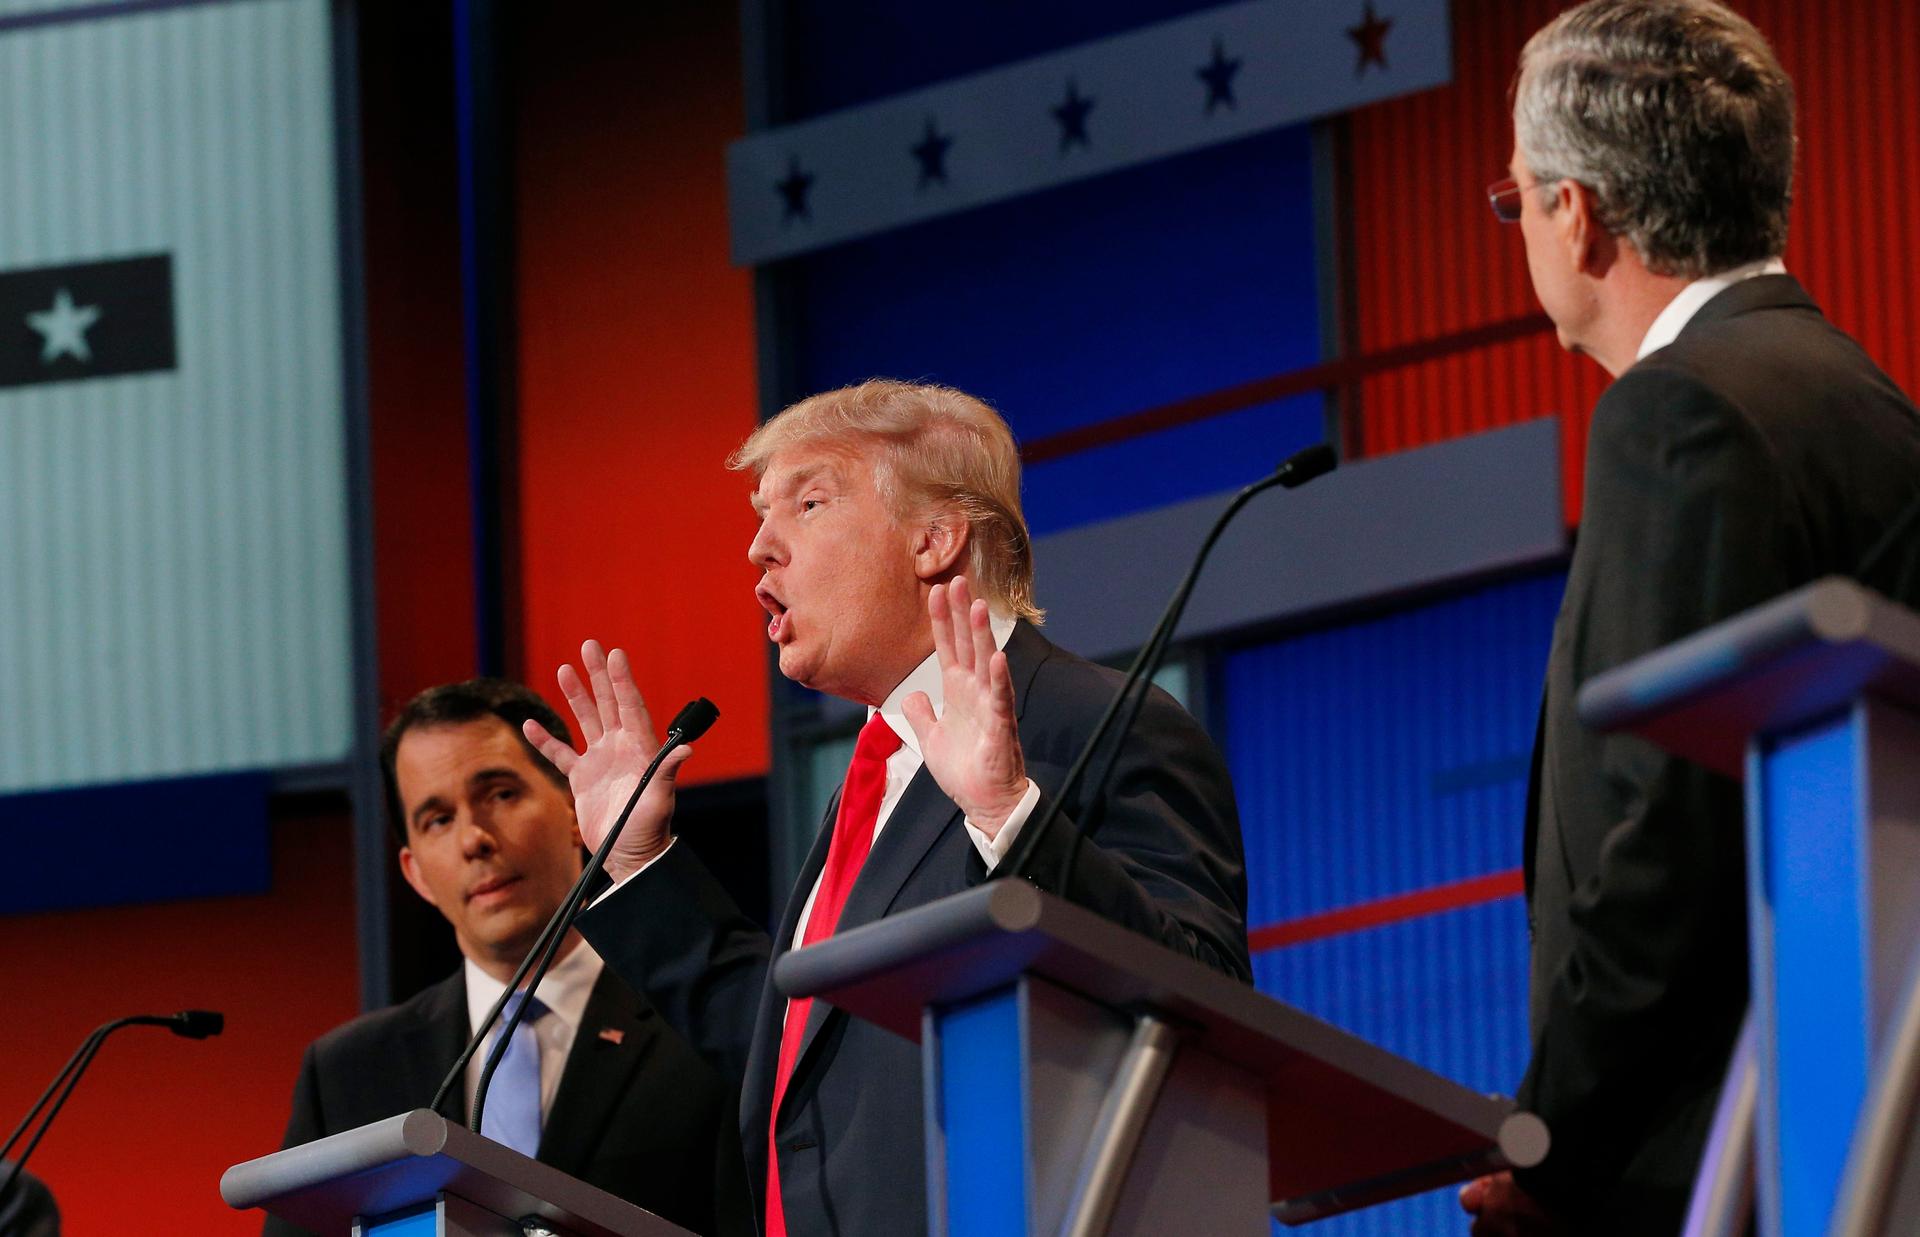 Donald Trump (C) center stage as fellow candidates Scott Walker (L) and Jeb Bush (R) listen at the first official debate in Cleveland, Ohio, August 6, 2015.